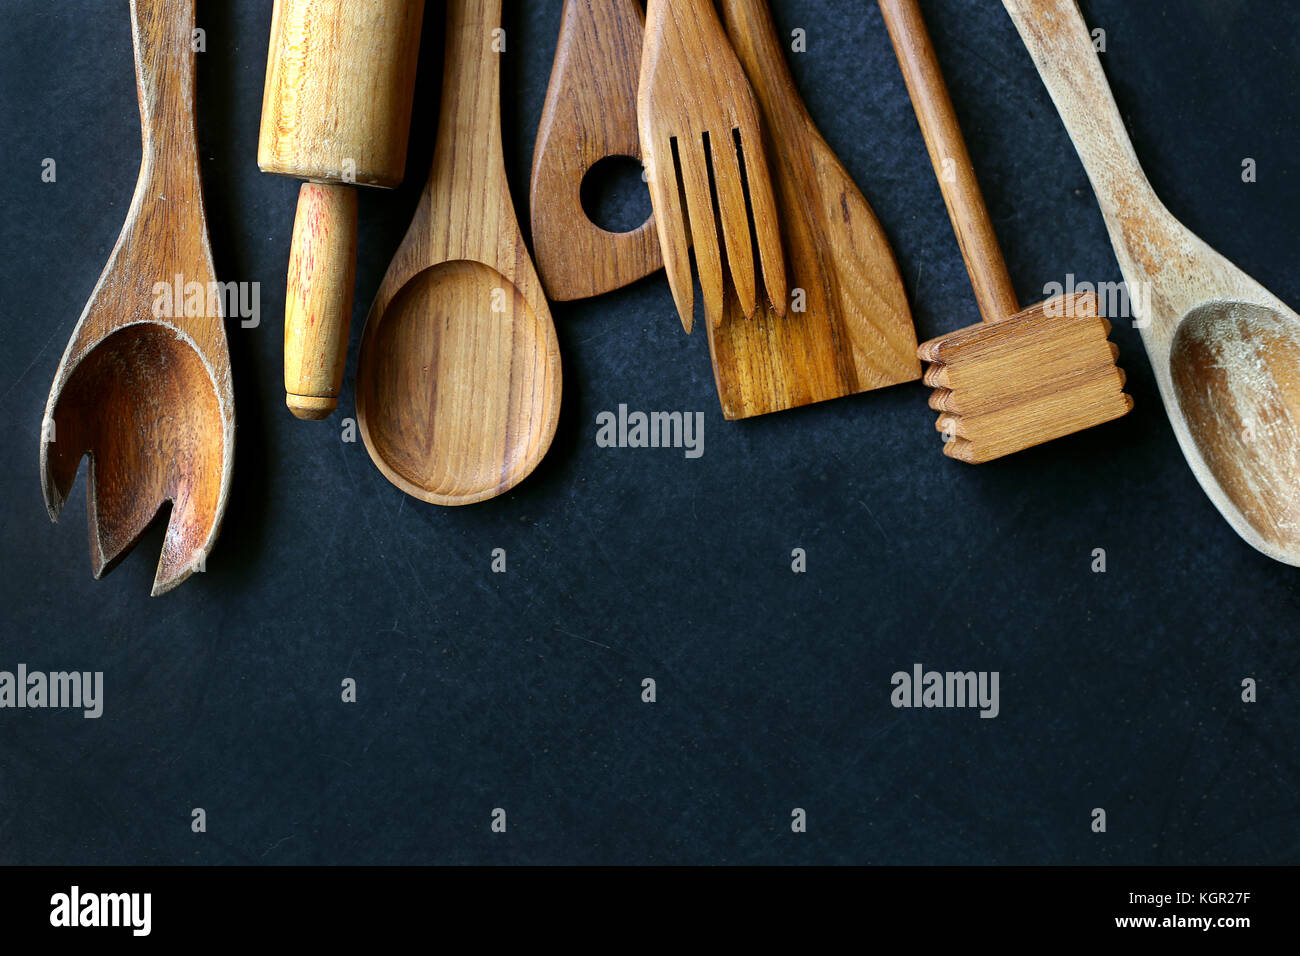 A Collection Of Vintage Wooden Cooking Utensils Spoons Rolling Pin Masher Spatula Are Framing The Top Border Of A Black Slate Chalkboard Stock Photo Alamy